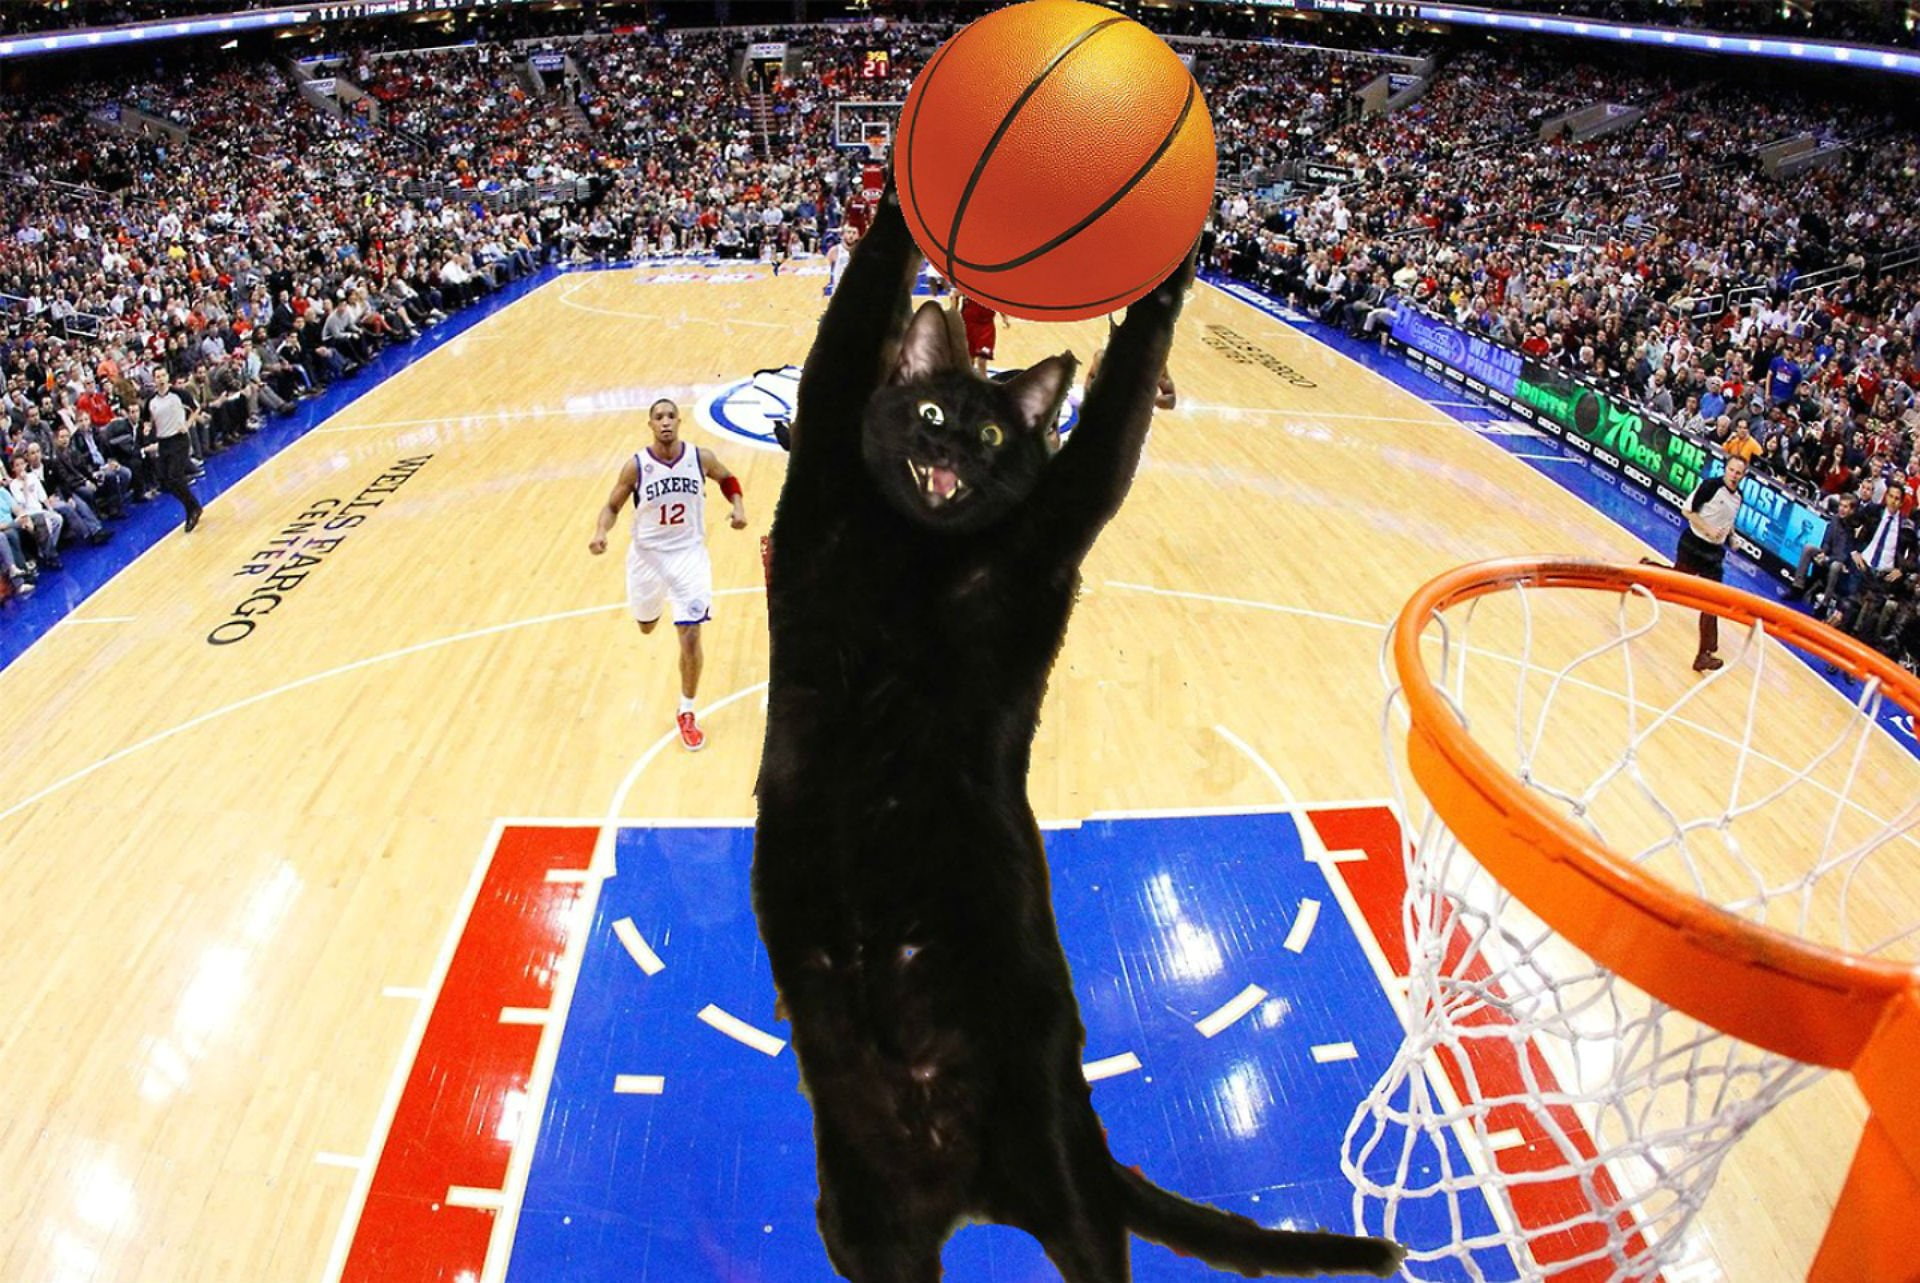 Basketball, cat, cats, funny, humor, Lol, sport, competition